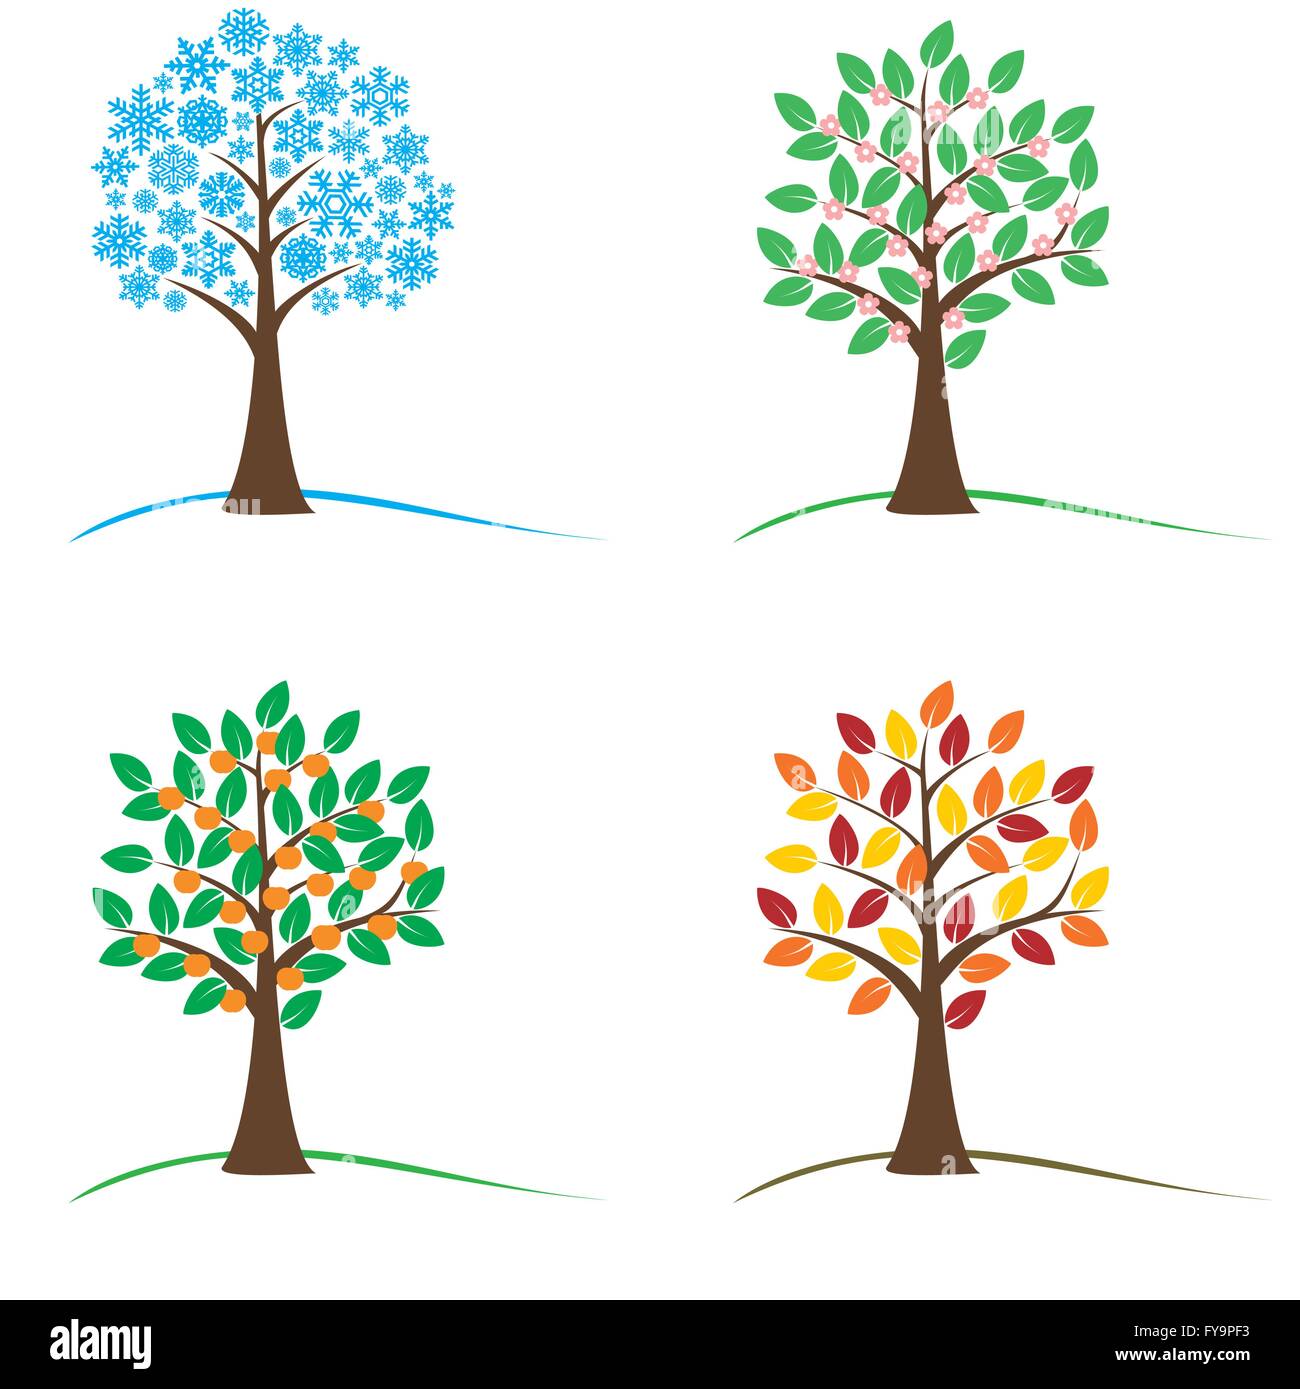 Tree in four seasons - spring, summer, autumn, winter. EPS8 vector illustration. Isolated on white background. Stock Vector